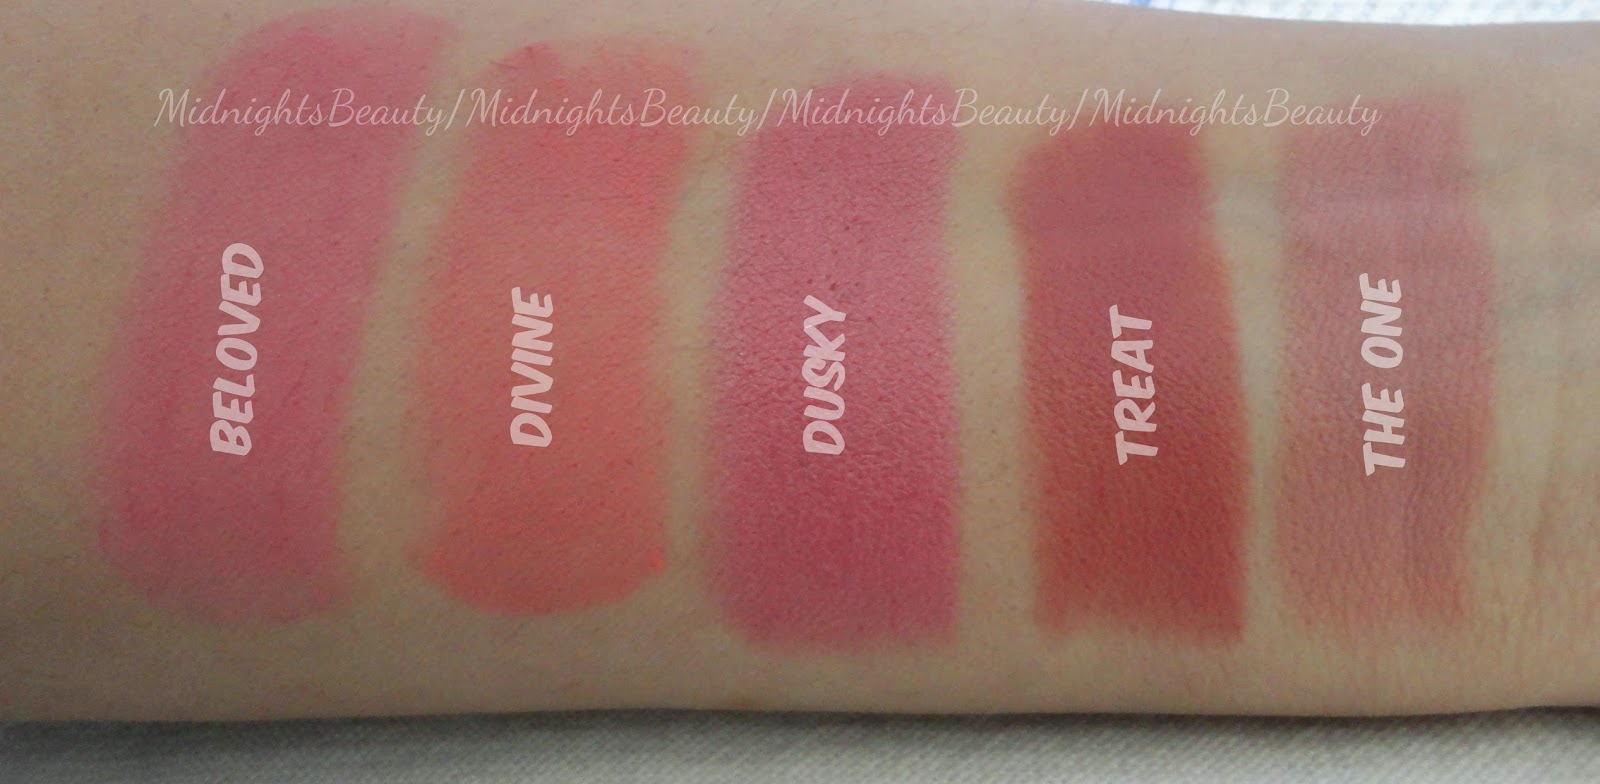 Makeup Revolution £ 1 Lipsticks: Swatches and Review.